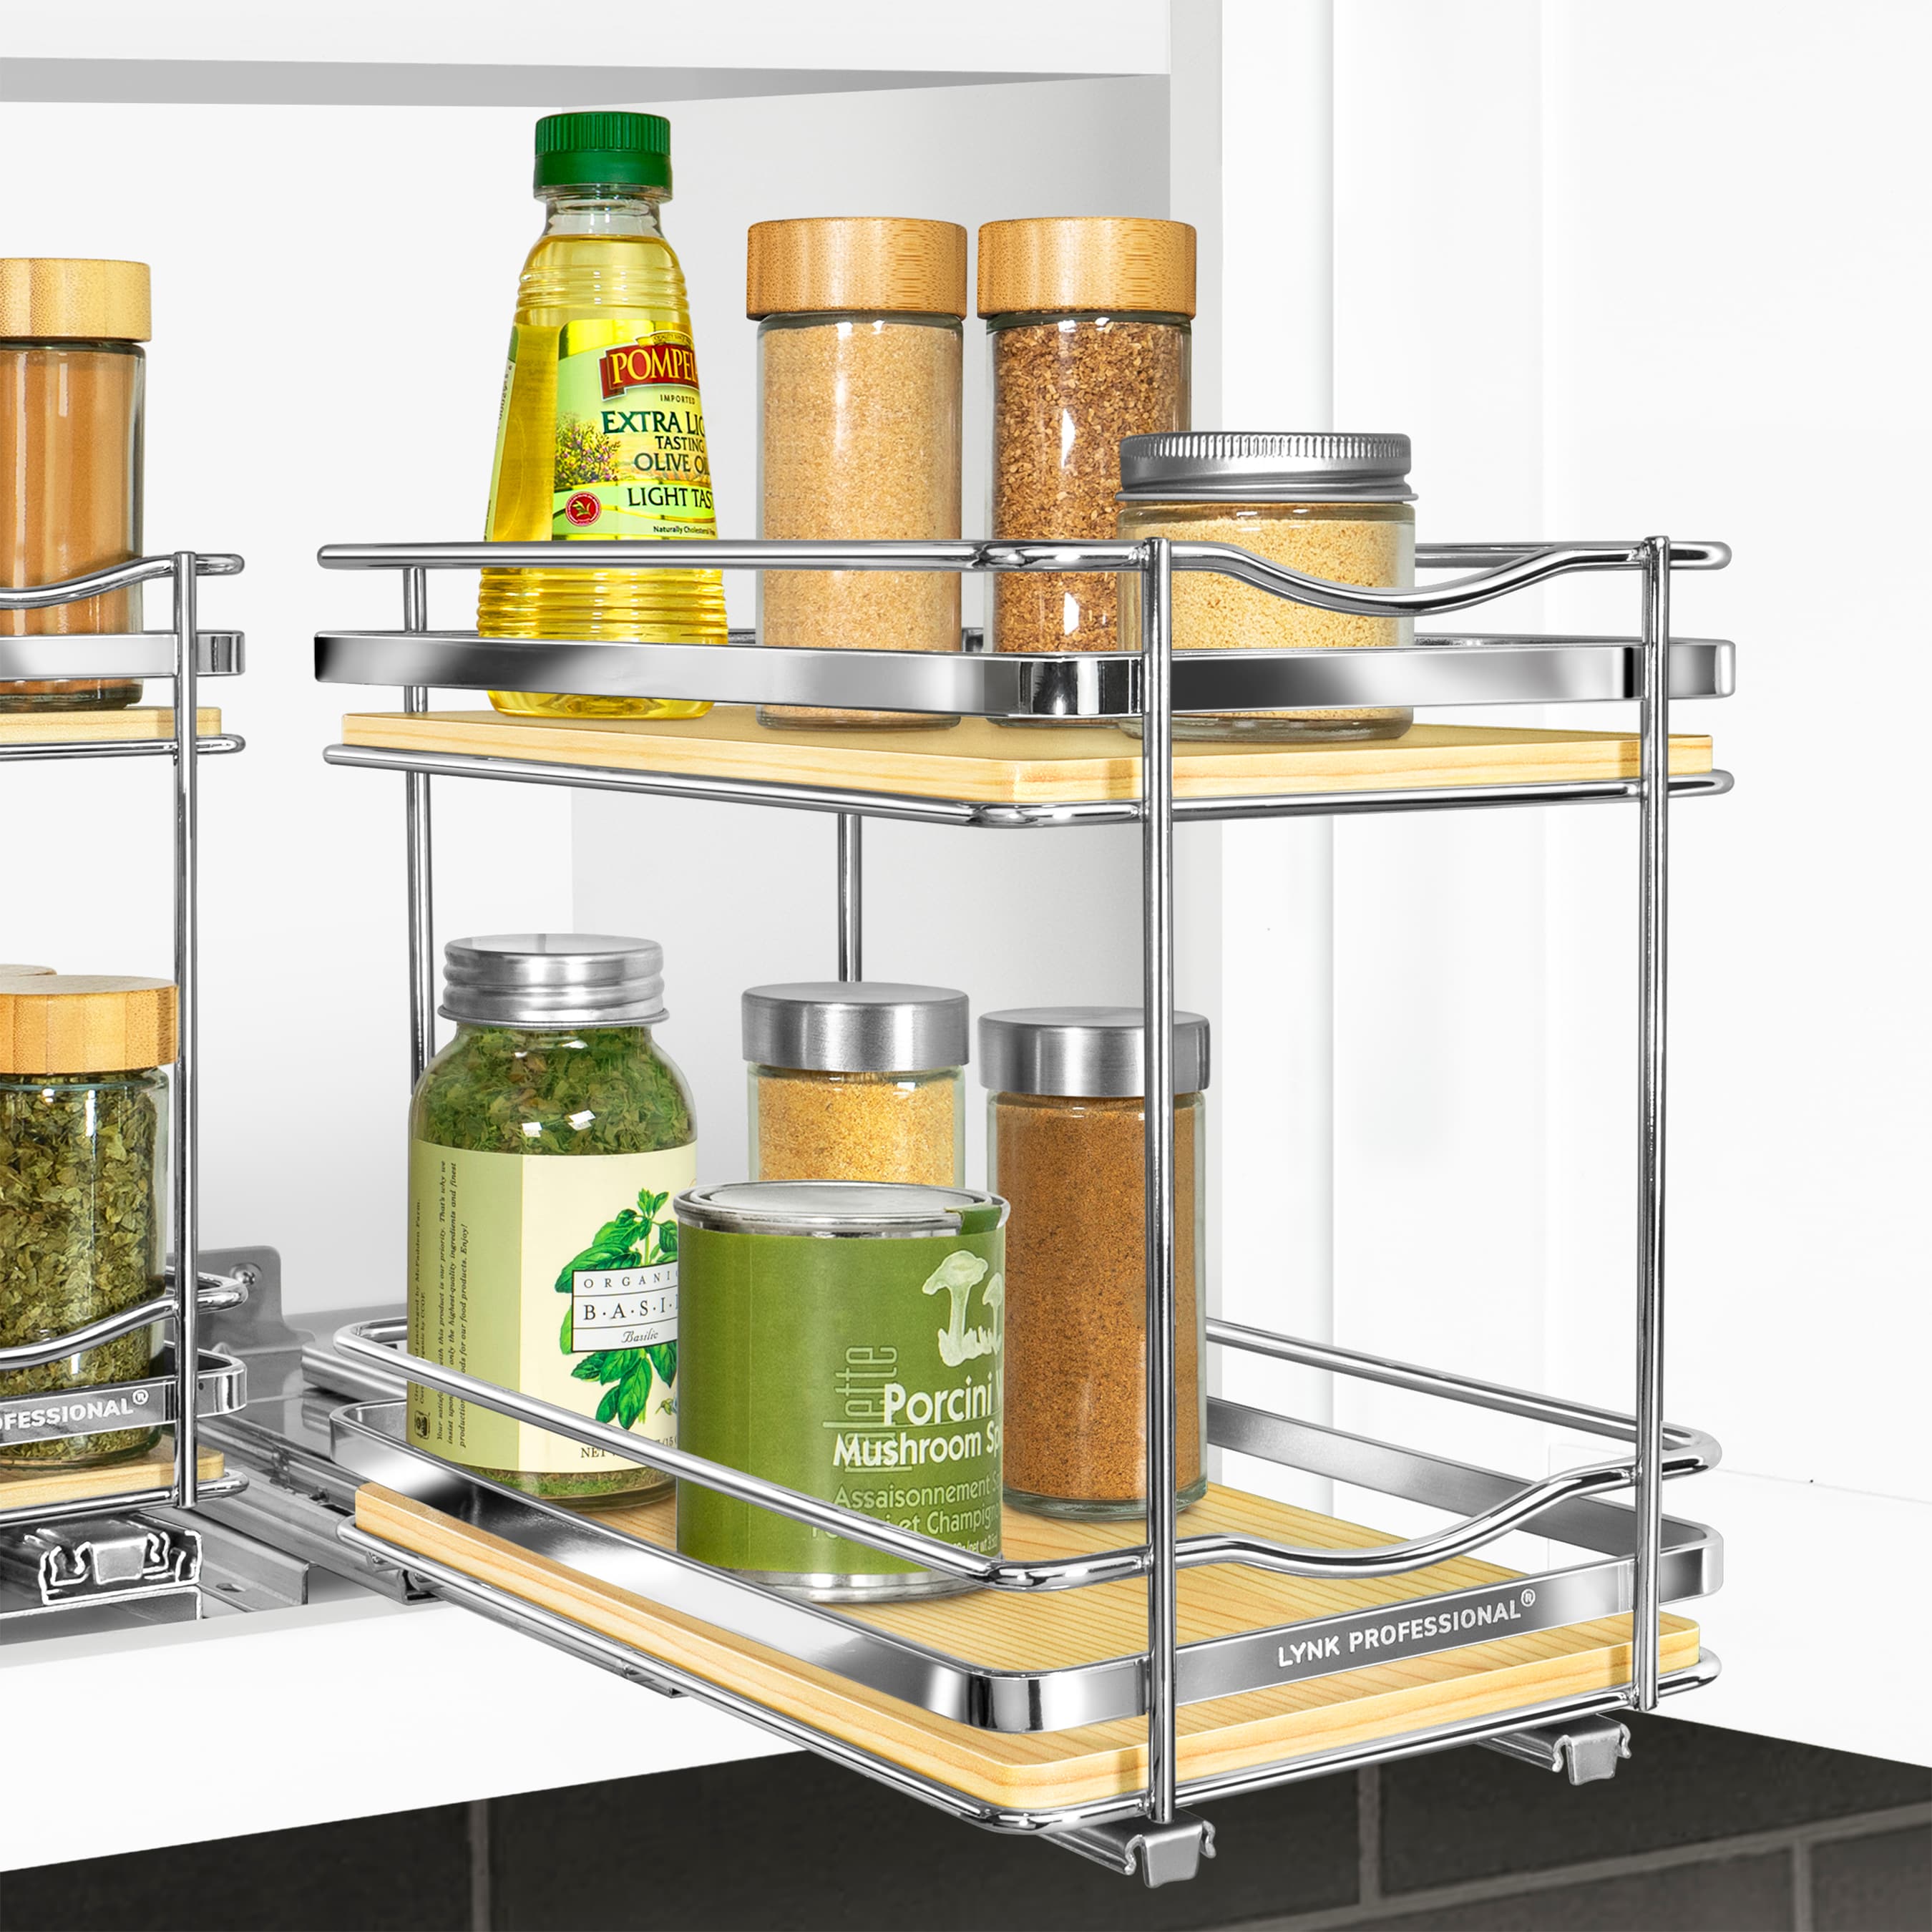 Lynk Professional 10-1/4 in. Wide - Double Silver Chrome Slide Out Spice Rack Pull Out Cabinet Organizer